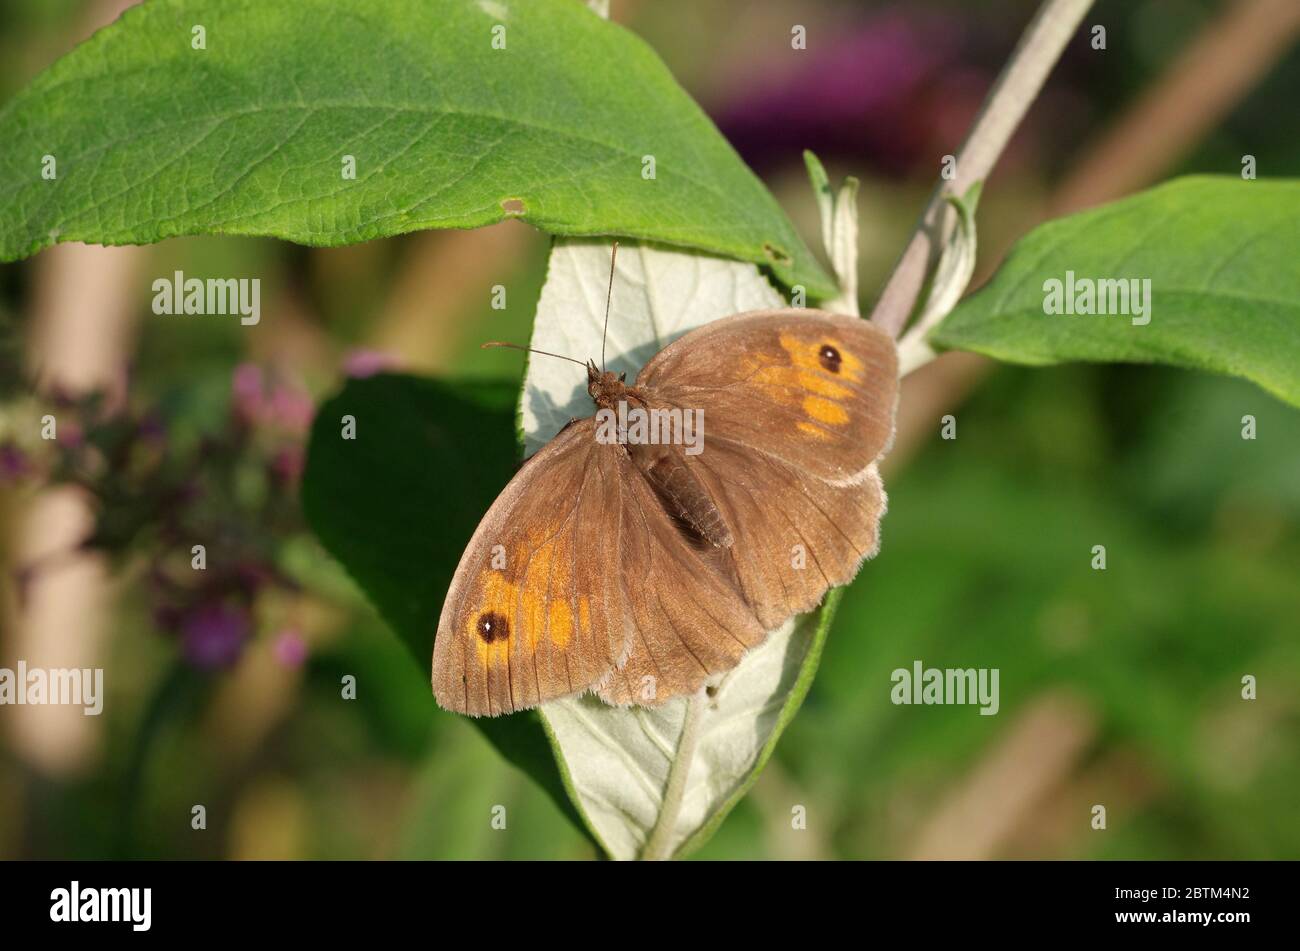 in the sunlight, a brown butterfly has opened its wings Stock Photo